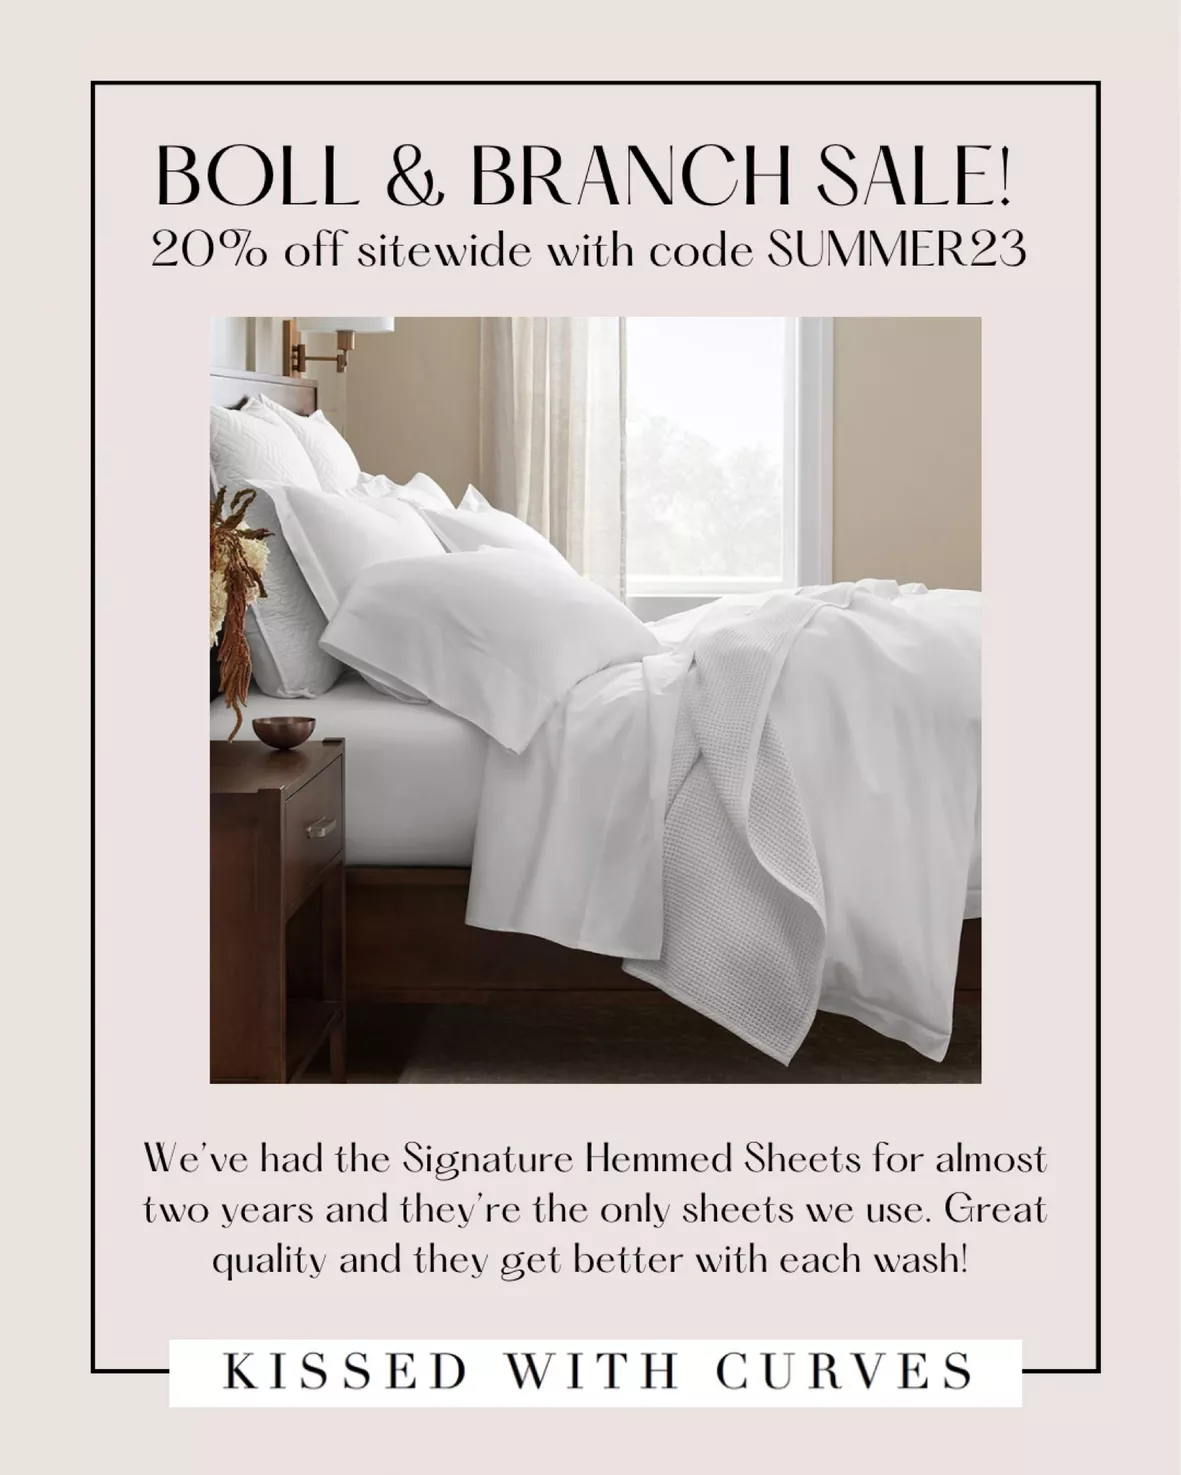 The Boll & Branch Black Friday Sale Is Still Going Strong